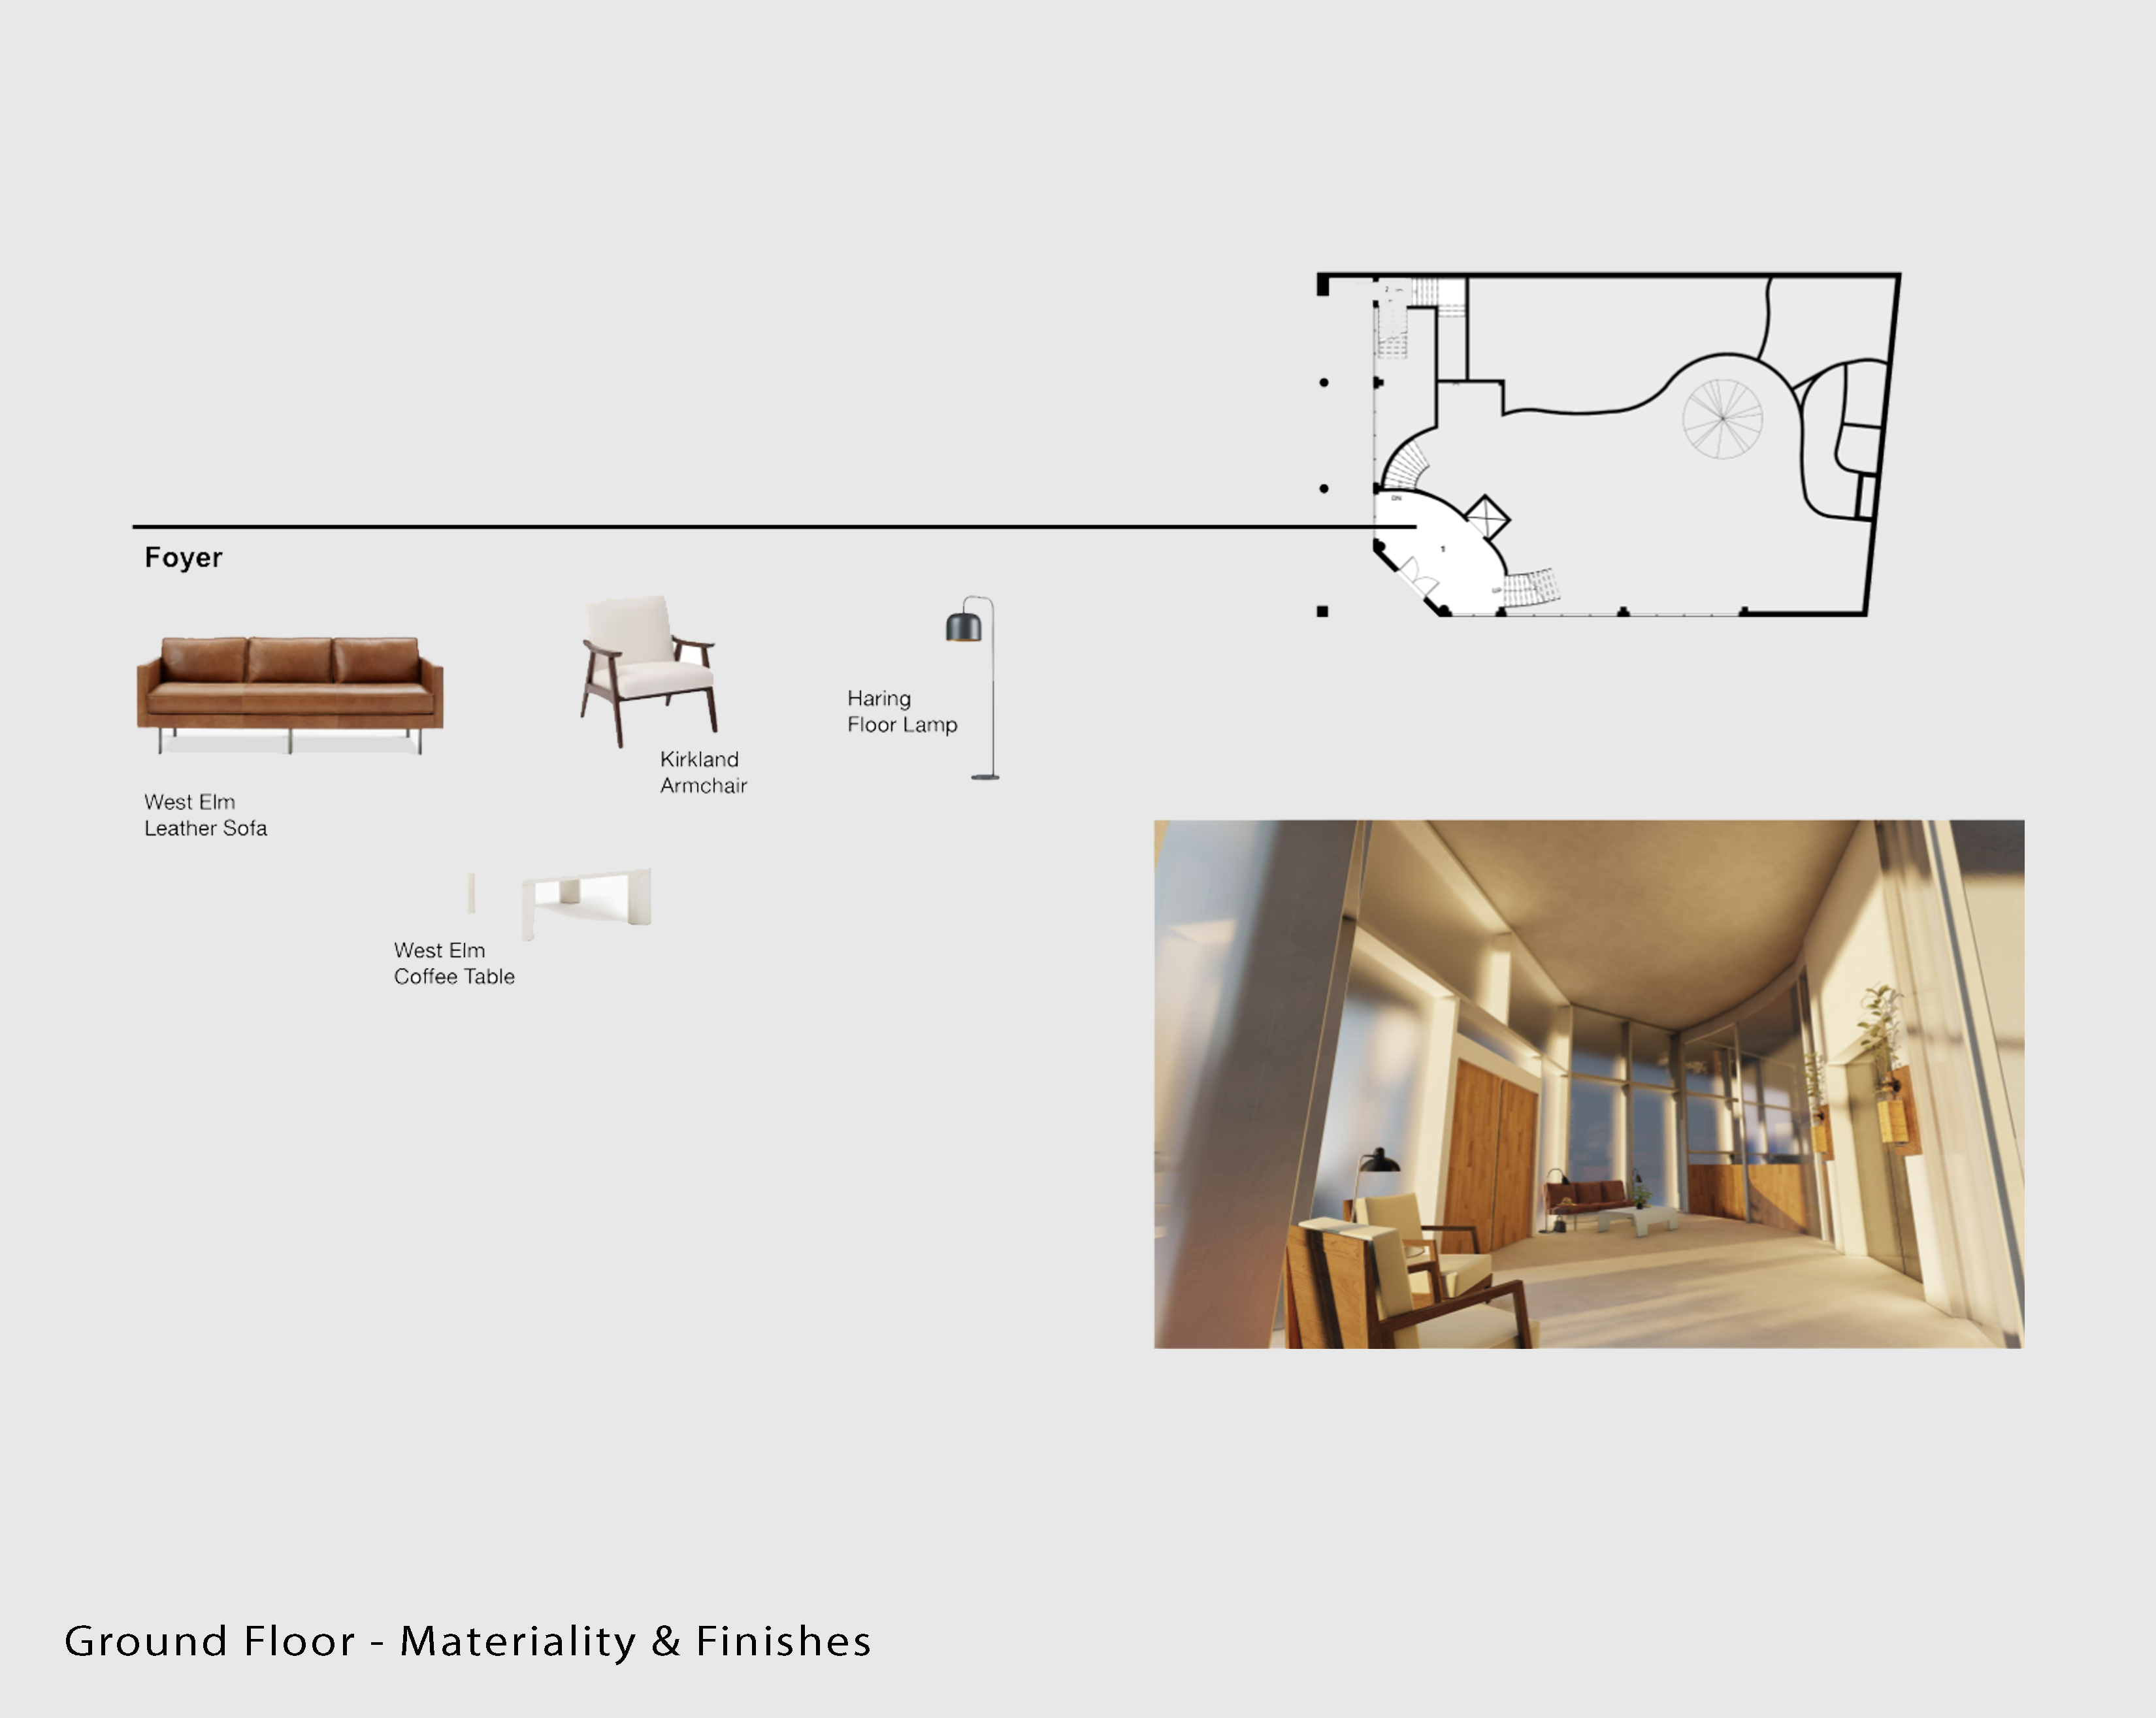 Ground Floor Materiality & Finishes